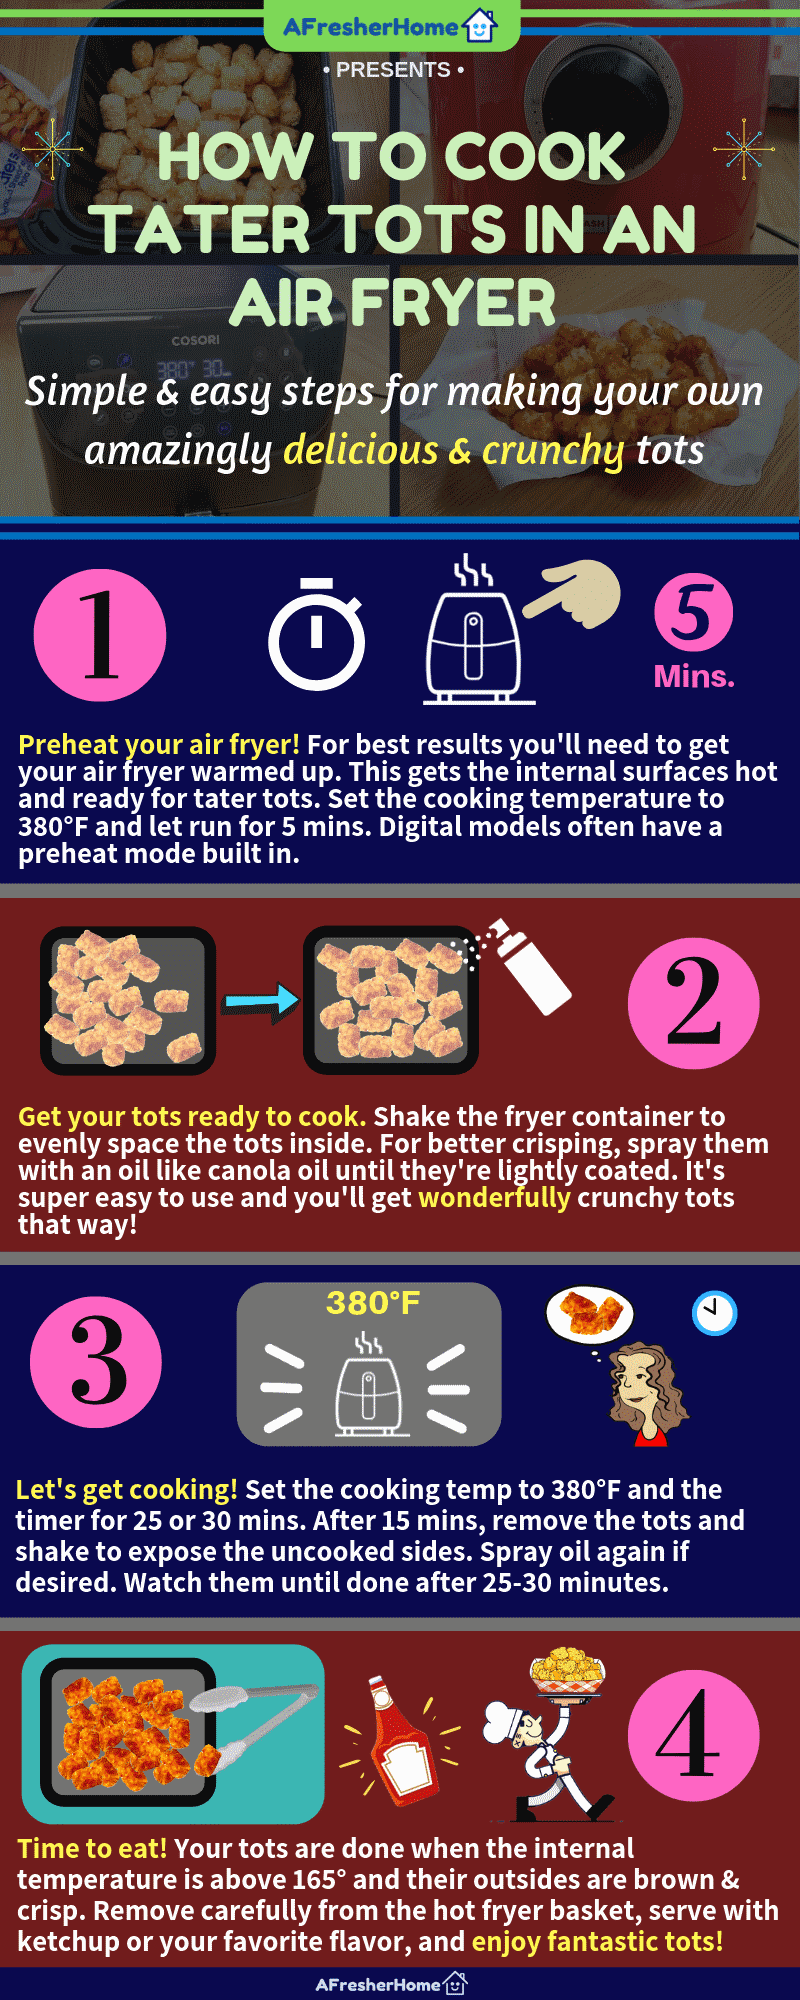 Infographic showing how to cook tater tots in an air fryer